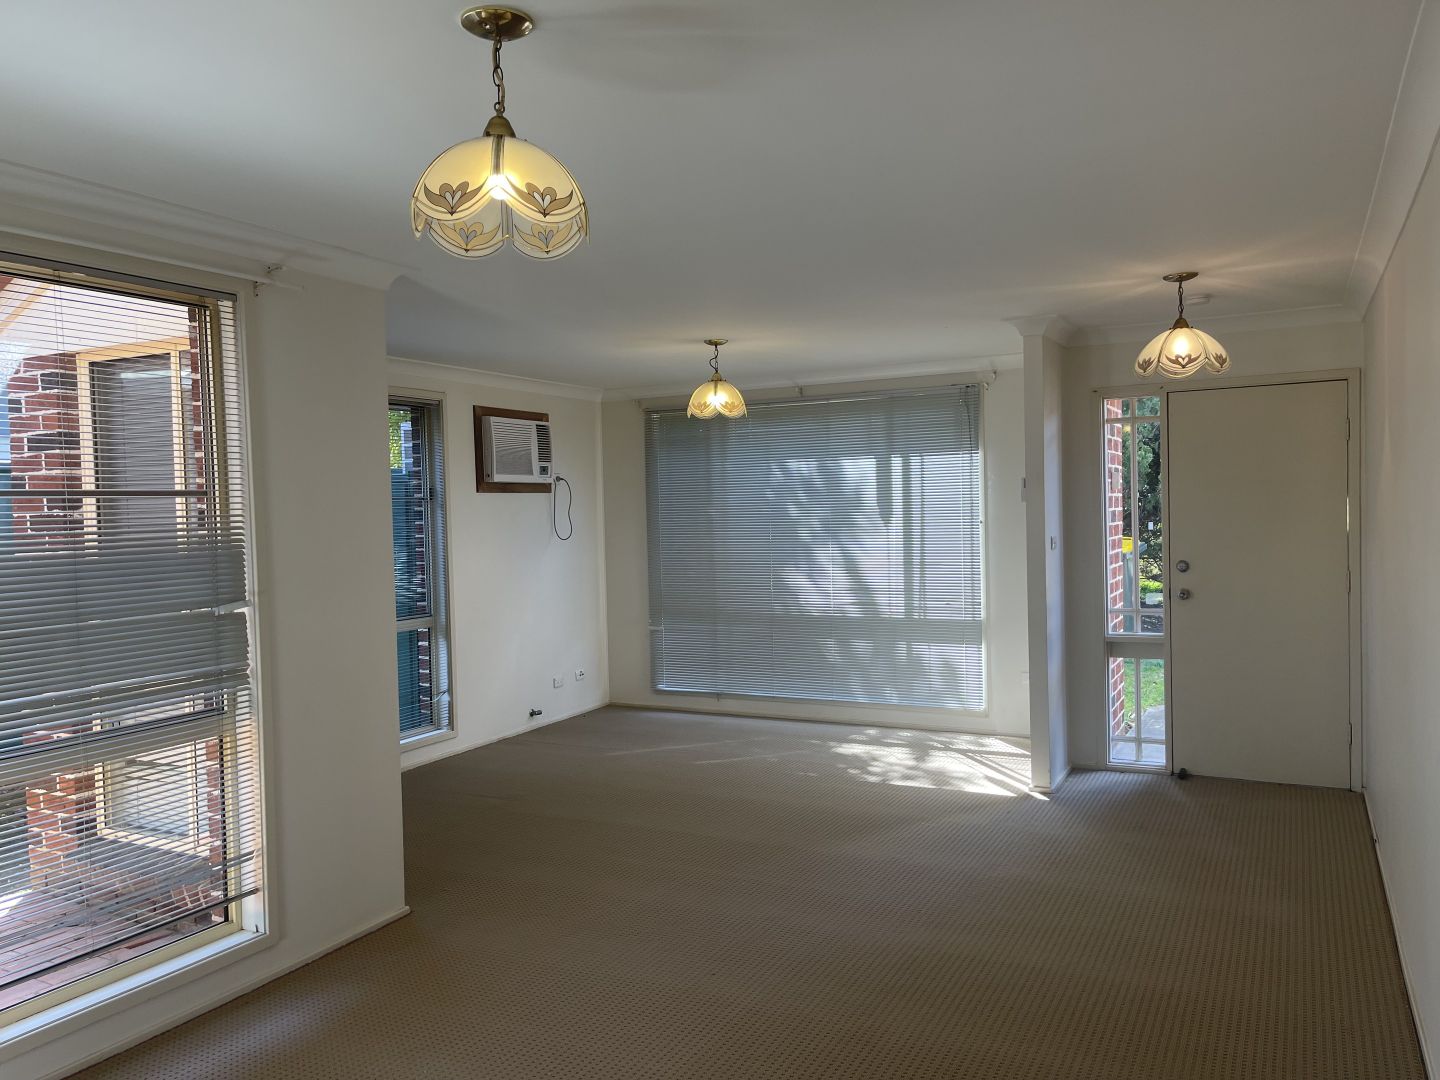 51 Manorhouse Blvd, Quakers Hill NSW 2763, Image 1